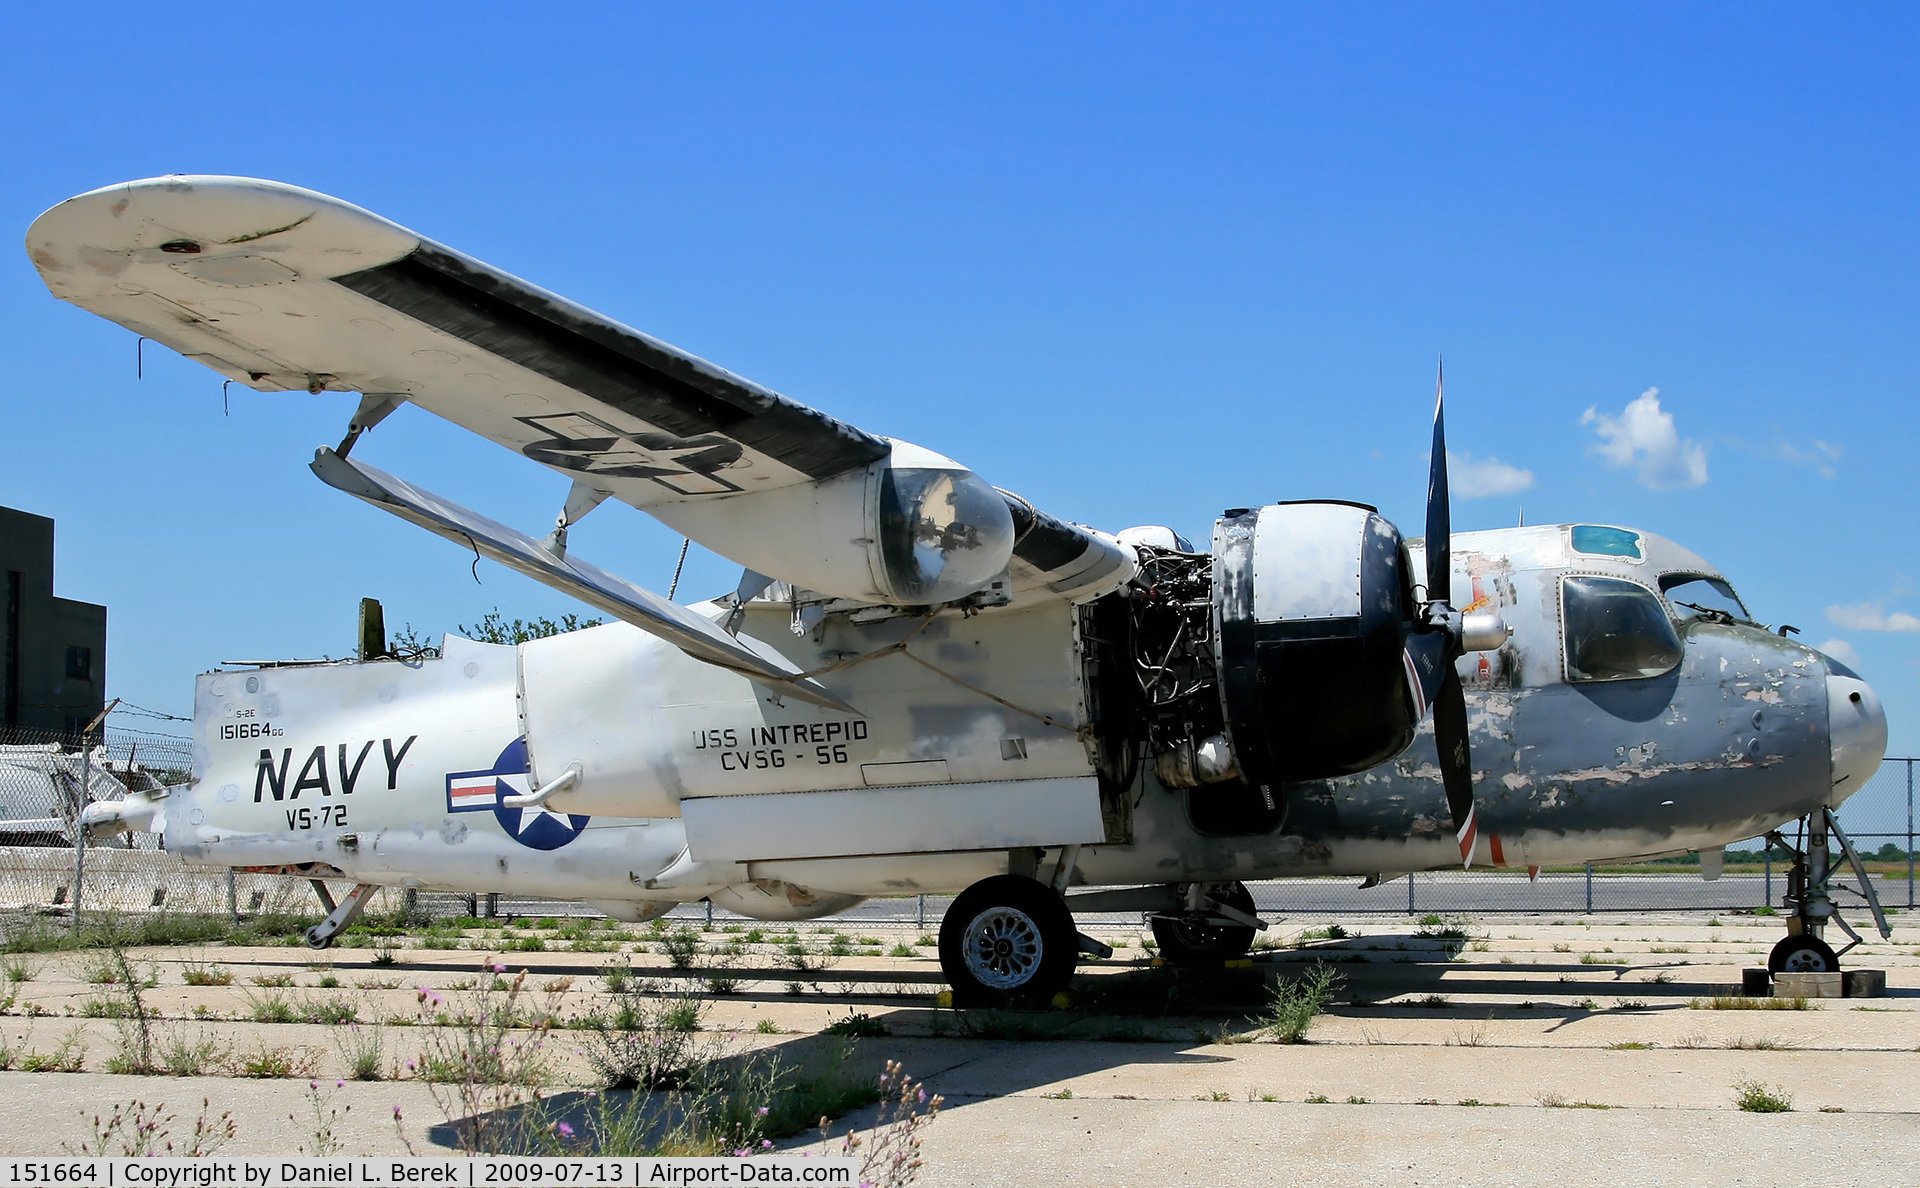 151664, Grumman S-2E Tracker C/N 197C, Unwanted and unloved, this poor tracker was first evicted from the Intrepid Air & Space Museum, then the Cradle of Aviation Museum.  For transportation, she has been ripped apart so badly that any reassembly is unlikely.  She sits at NAS Floyd Bennett Fie